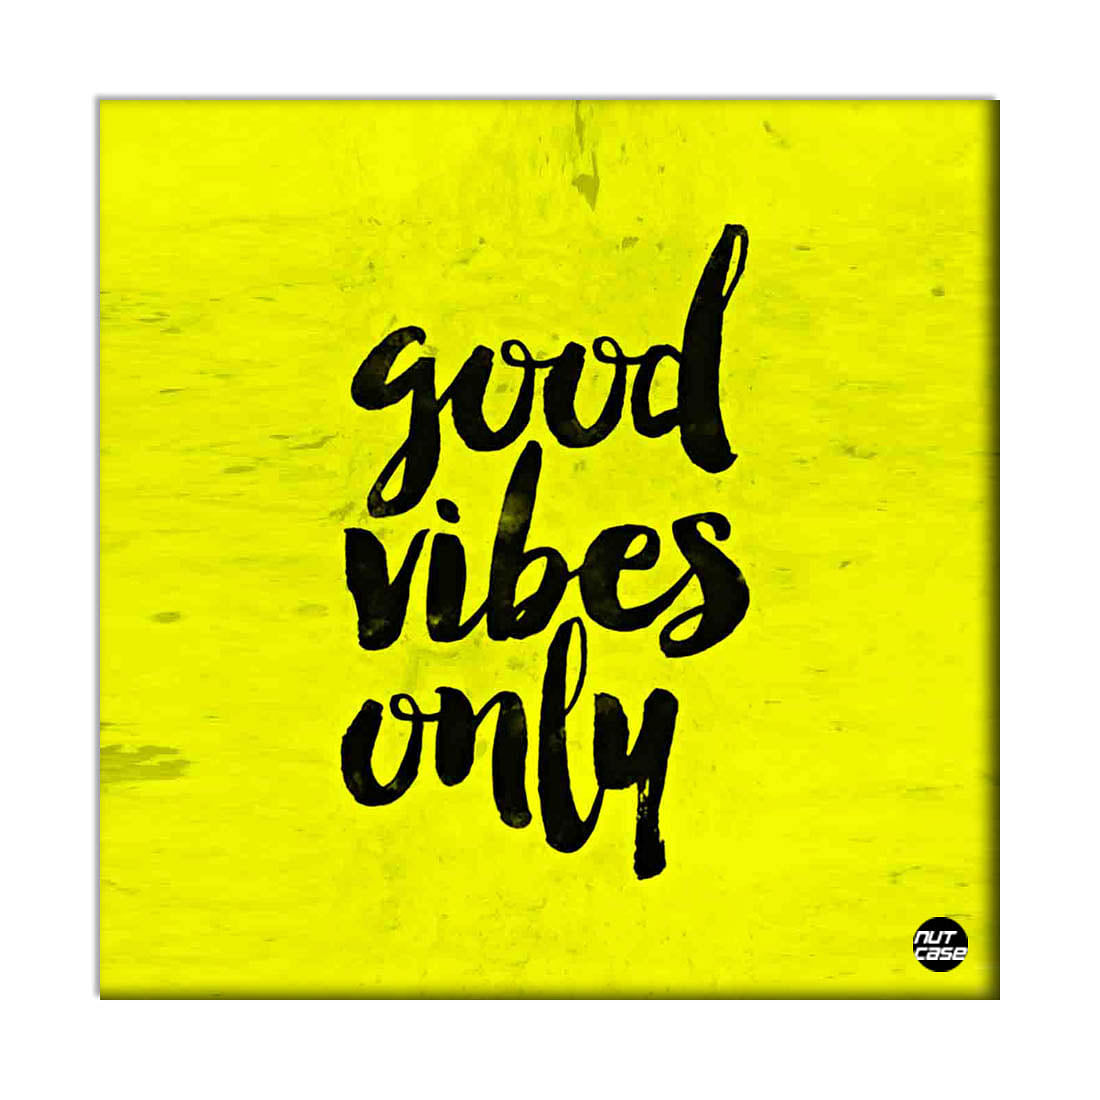 Wall Art Decor Panel For Home - Good Vibes Only Yellow Nutcase